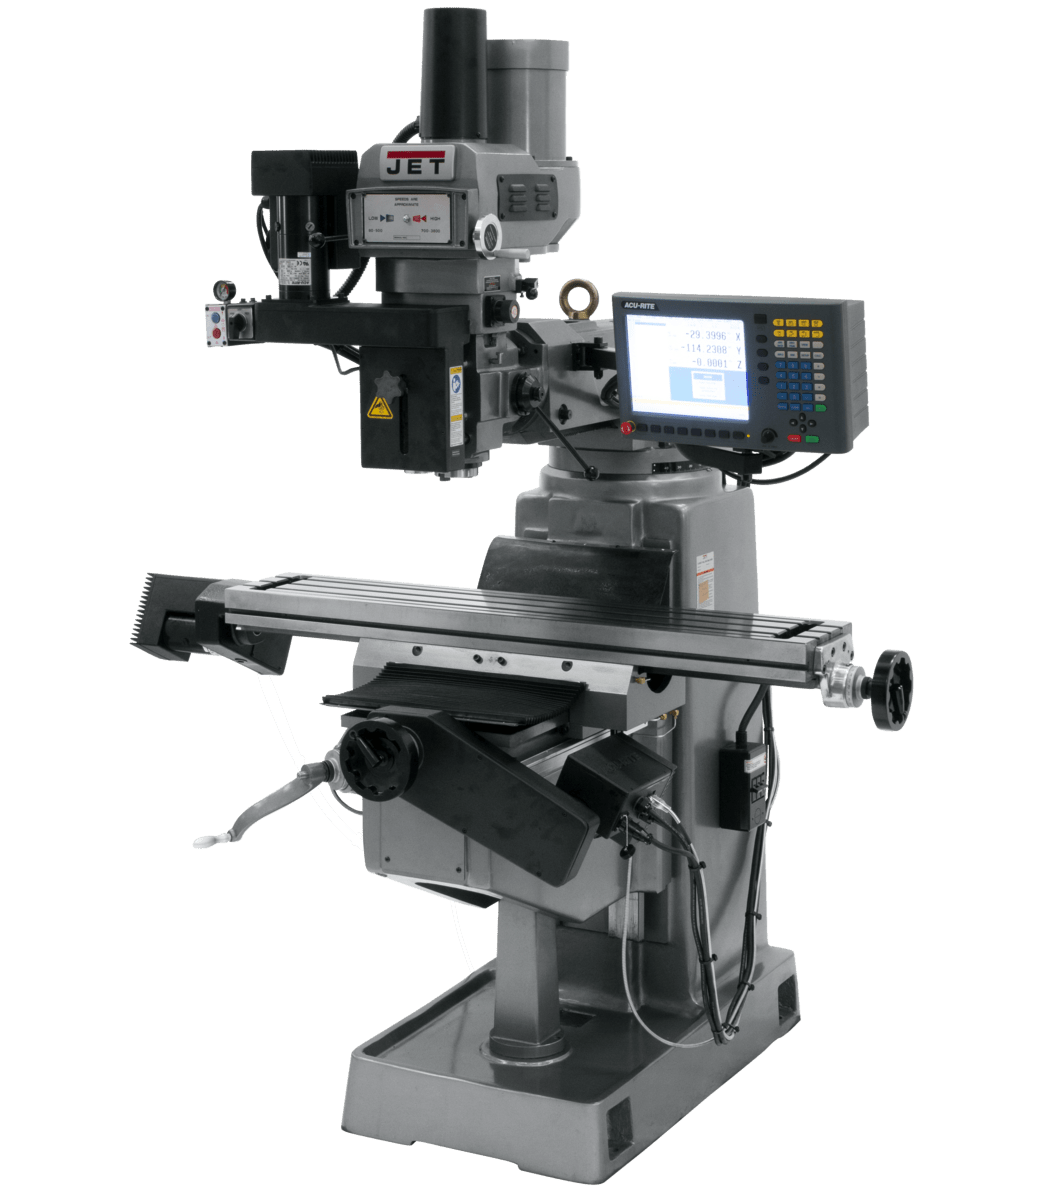 JTM-4VS-1 Mill With 3-Axis ACU-RITE G-2 MILLPWR CNC - Jet